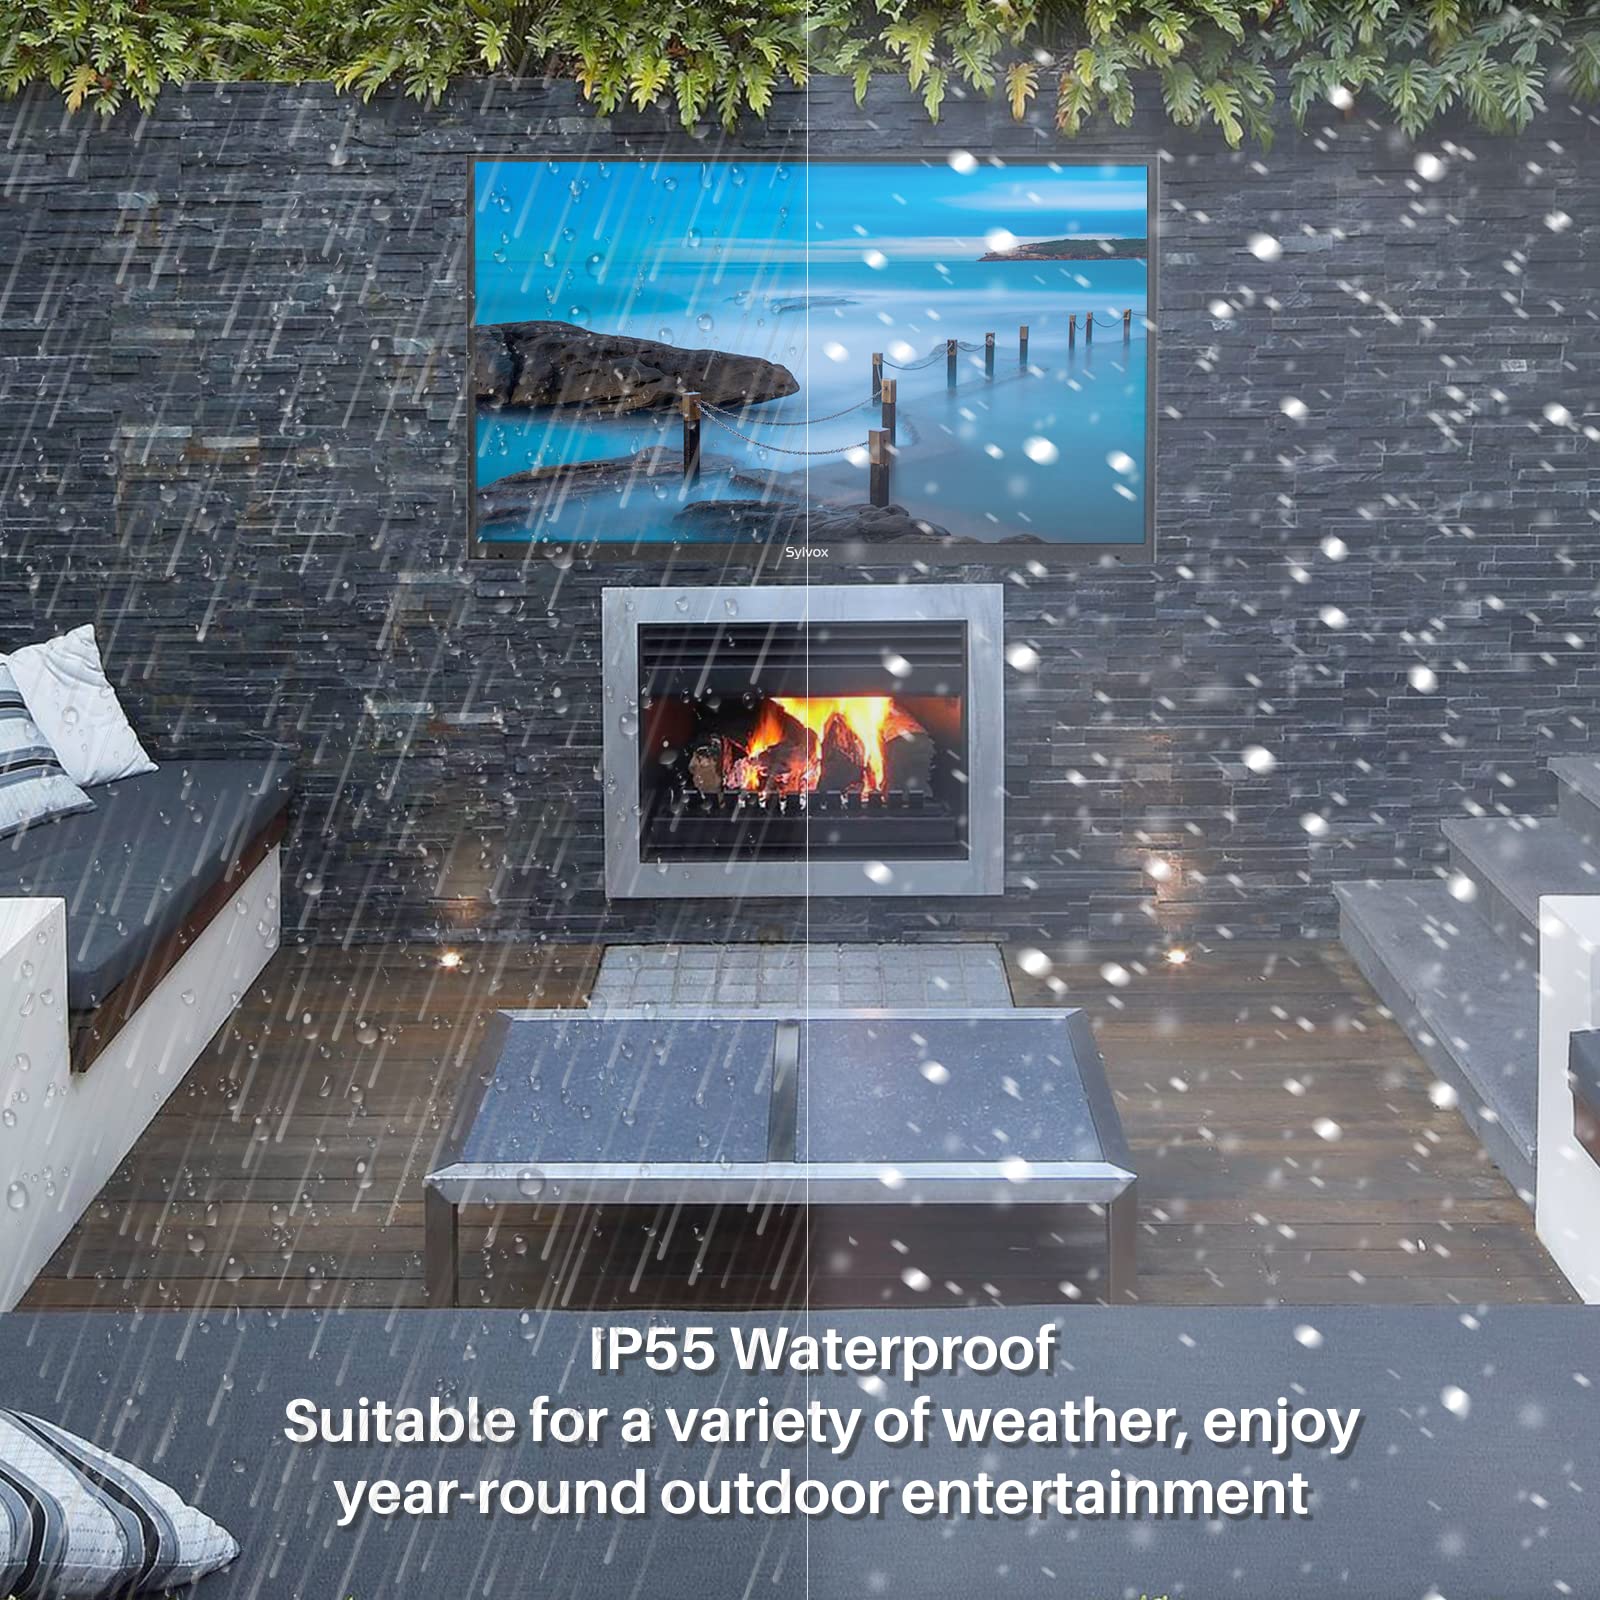 SYLVOX 55” Outdoor TV with 60W Waterproof Soundbar & Wall Mount, 4K Weatherproof TV, IP55 Waterproof TV & IP65 Bluetooth Speaker, 1000nits Brightness for Partial Sun Areas